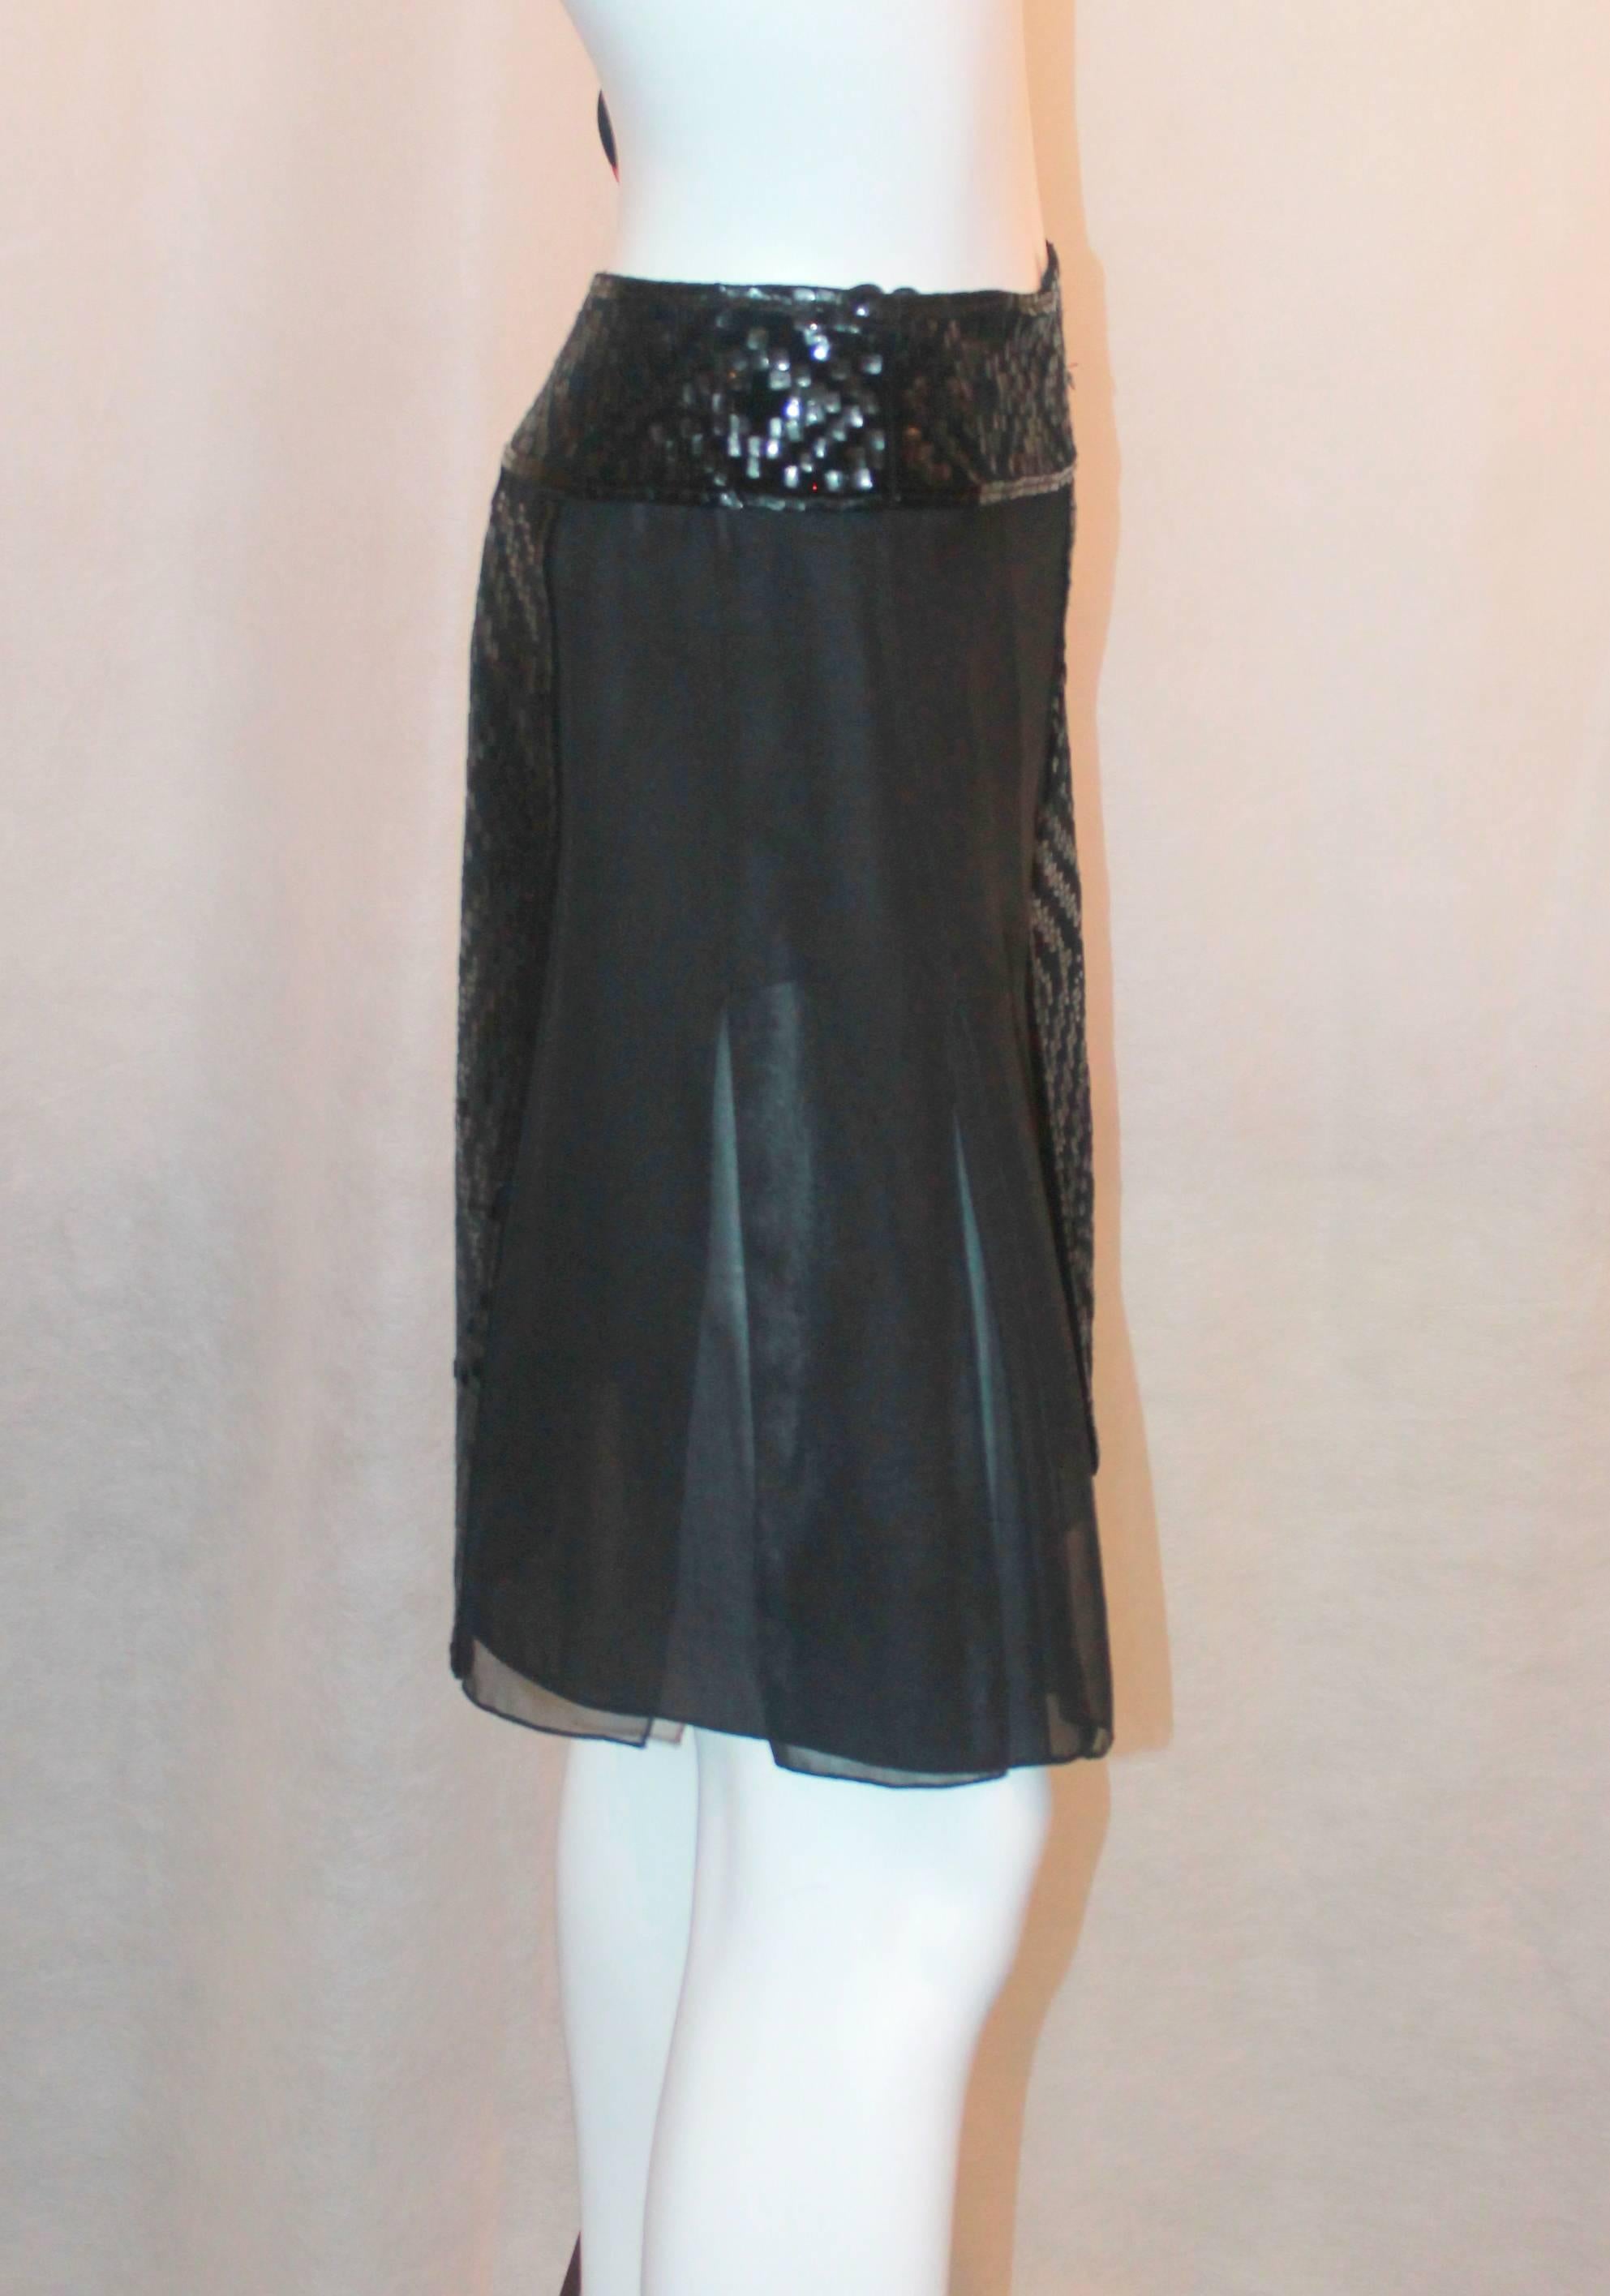 J. Mendel Black Silk Skirt with Sequin Panels - 8. This skirt is in excellent condition and has a 2 layer carwash pleat. There is a Velvet and sequin design on the waistband and the front & back panels. 

Measurements:
Waist- 28.5